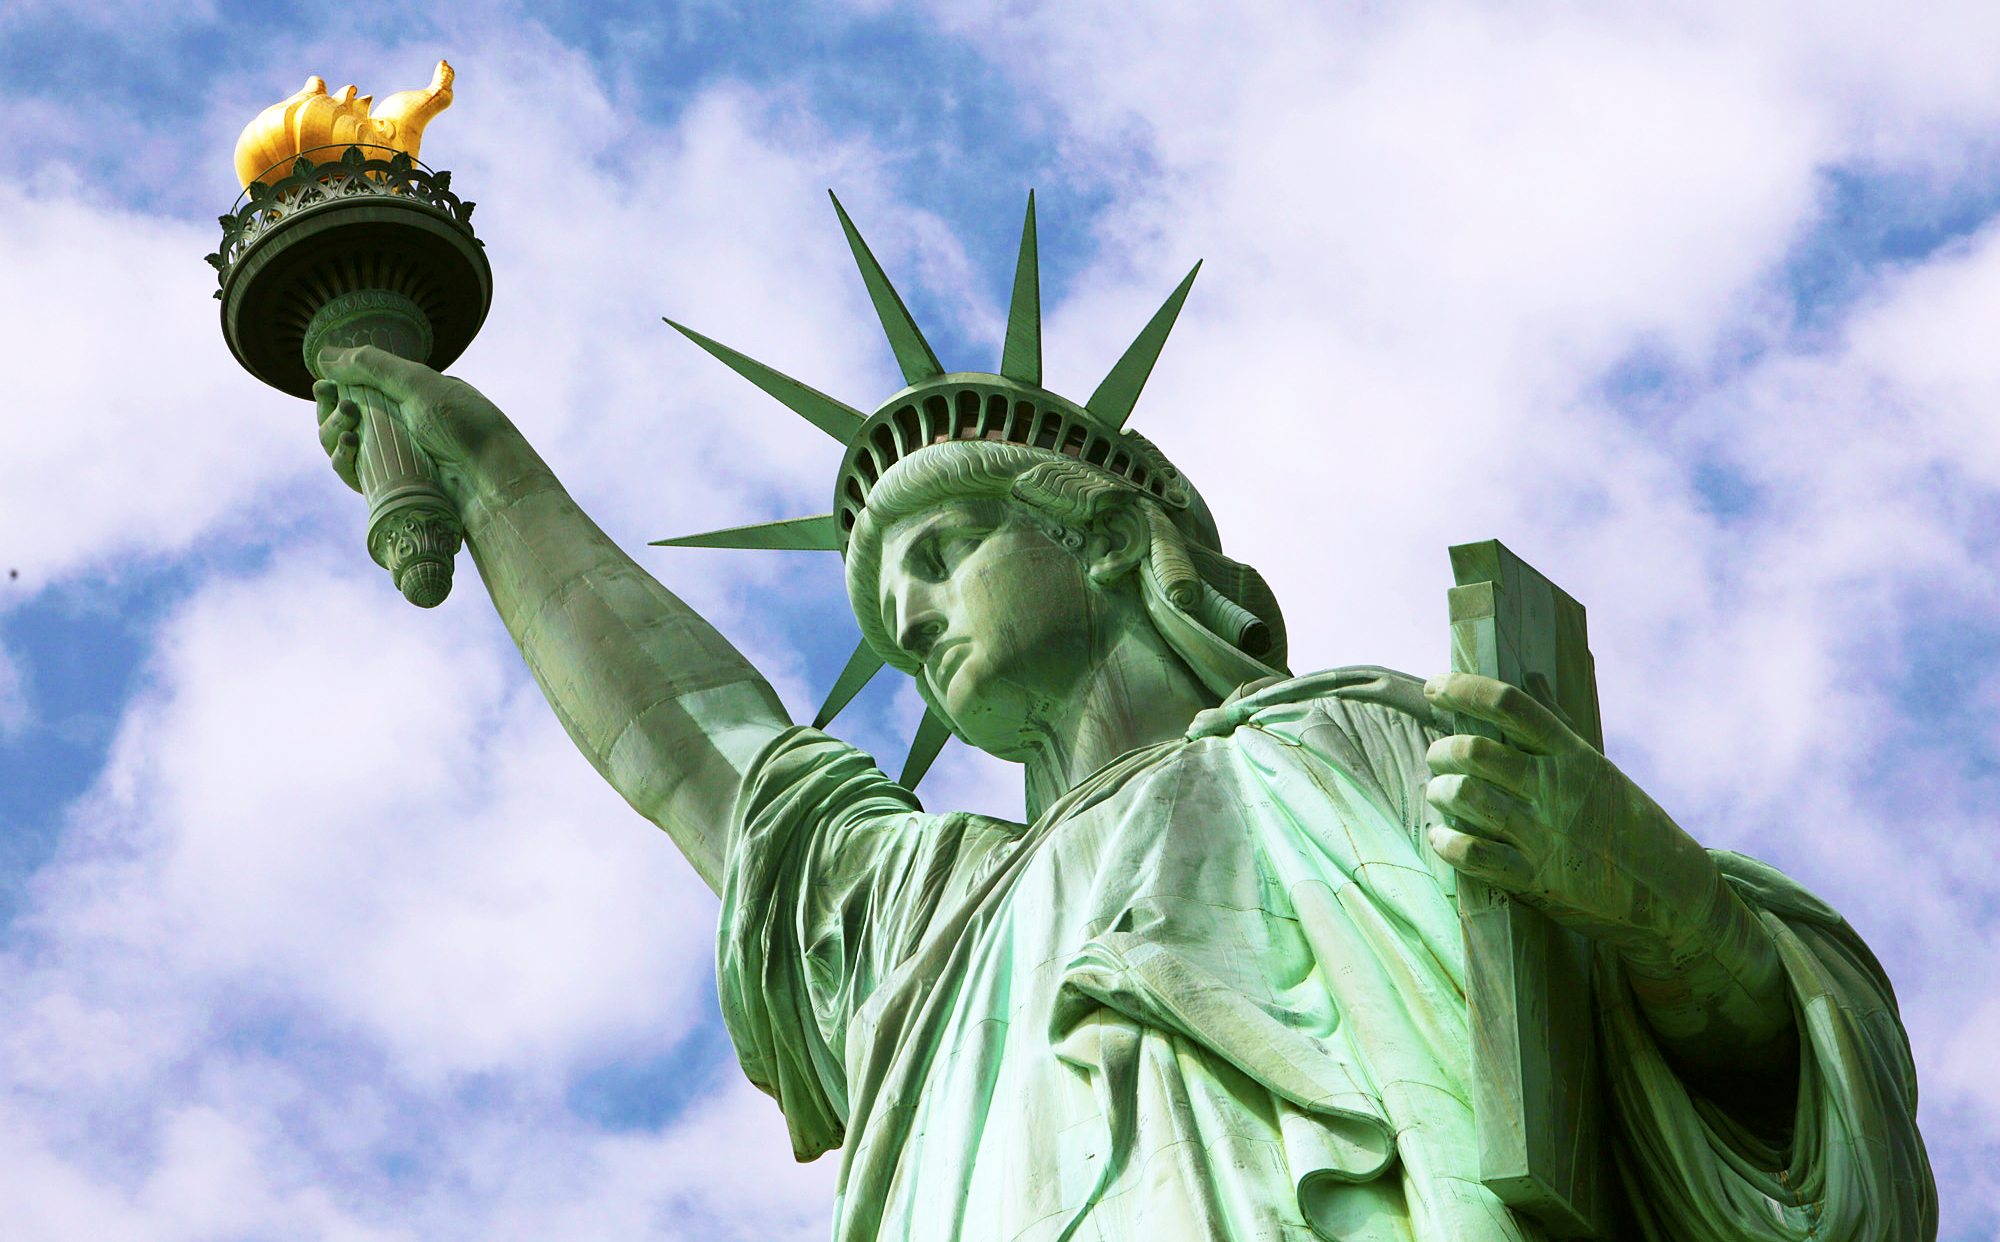 The world meets Lady Liberty...on this day | ShareAmerica